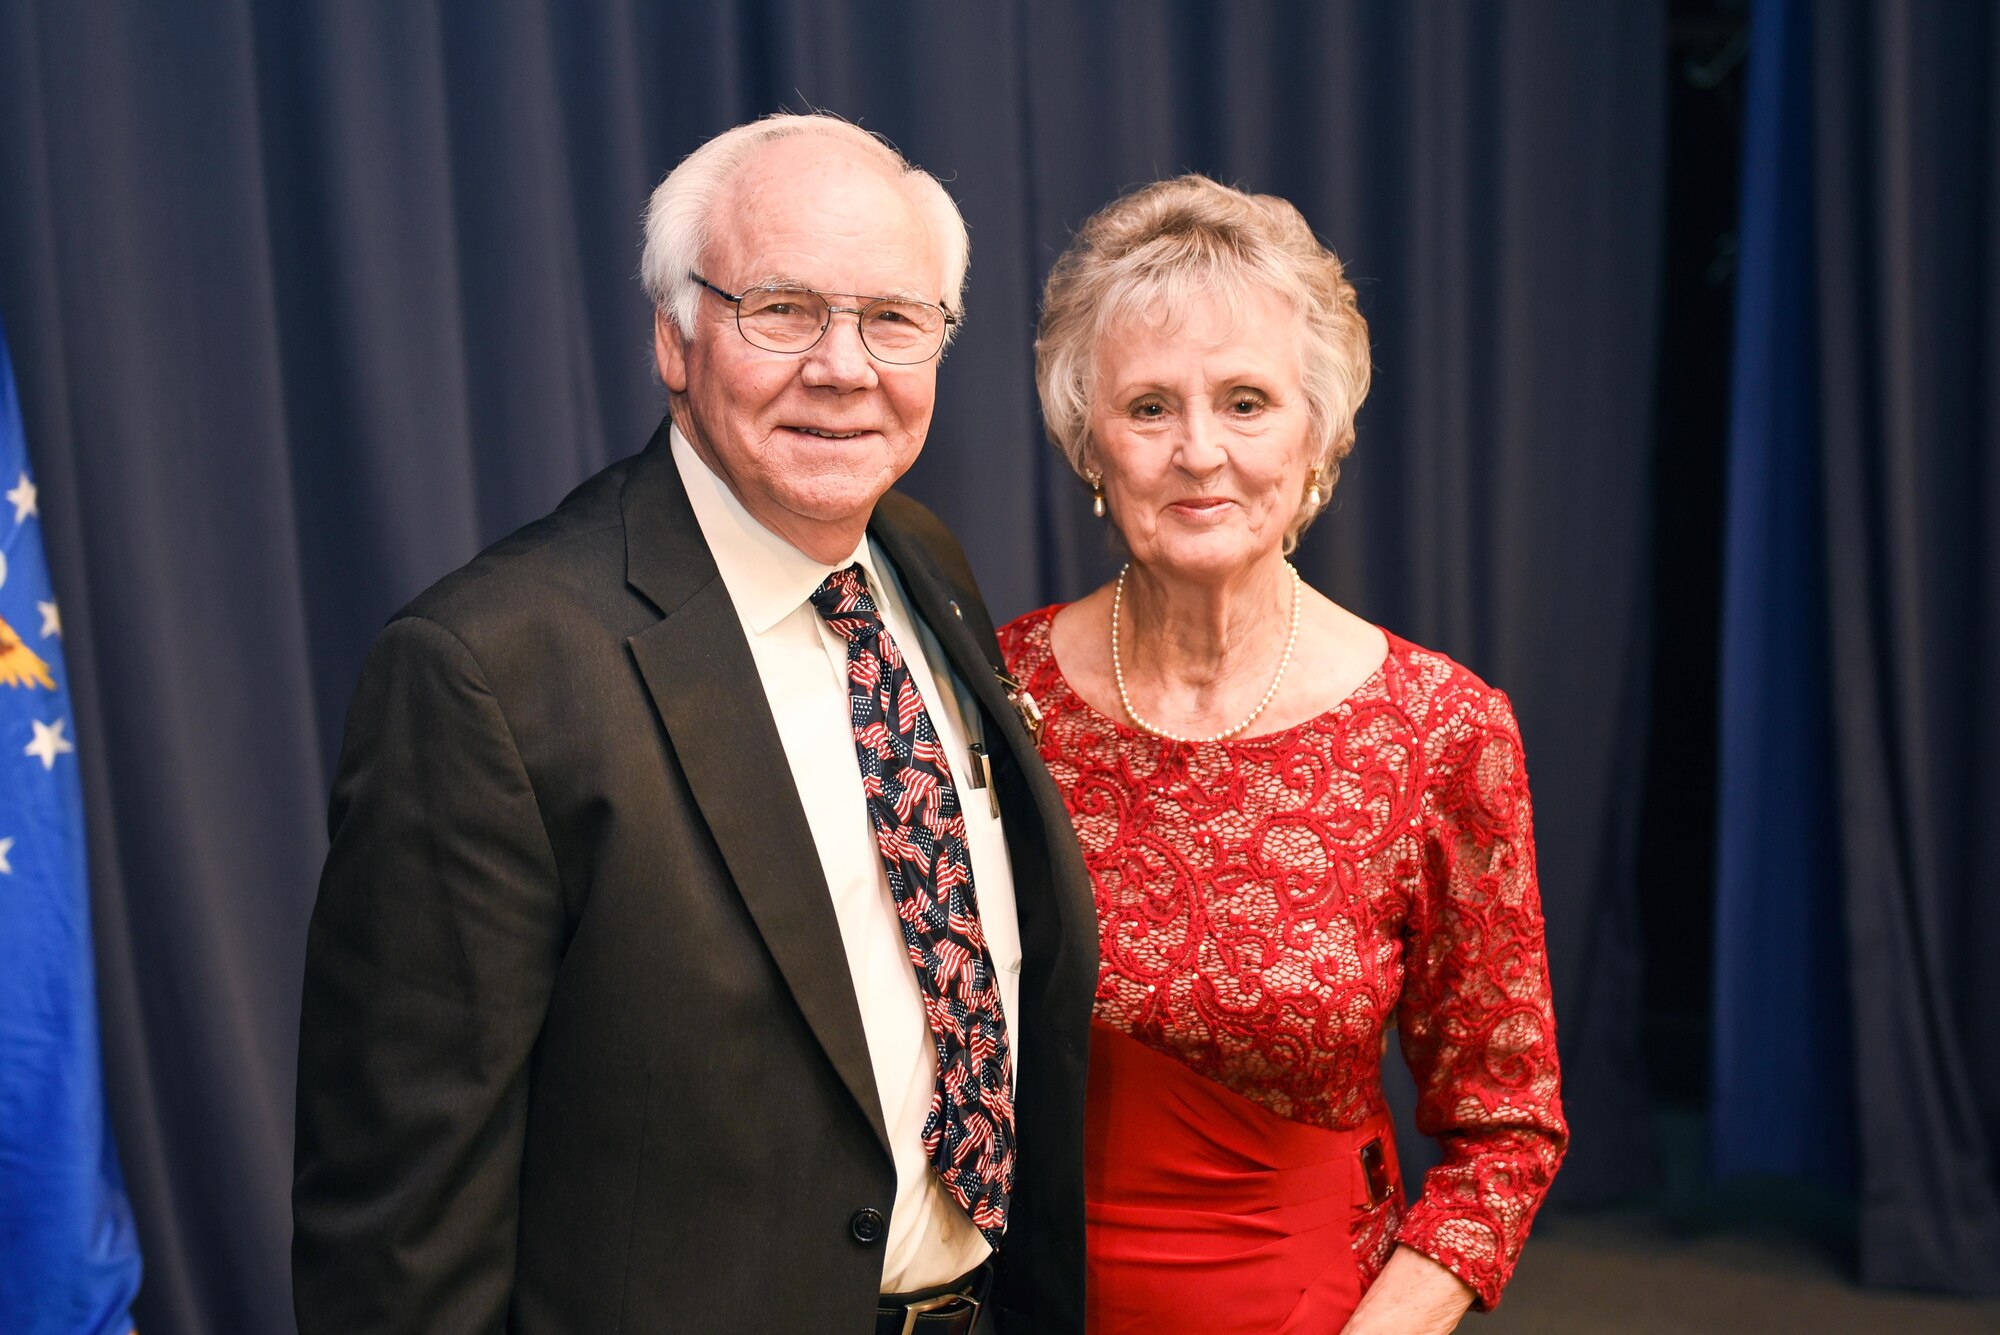 Jerry McCallister and his wife Lee at his retirement ceremony at Hurlburt Field, Fla., Dec. 9, 2016. McCallister retired from the civil service after 30 years. He also served 23 years on active duty bring his total service to the Air Force at 53 years. (U.S. Air Force photo by Senior Airman Jeff Parkinson)